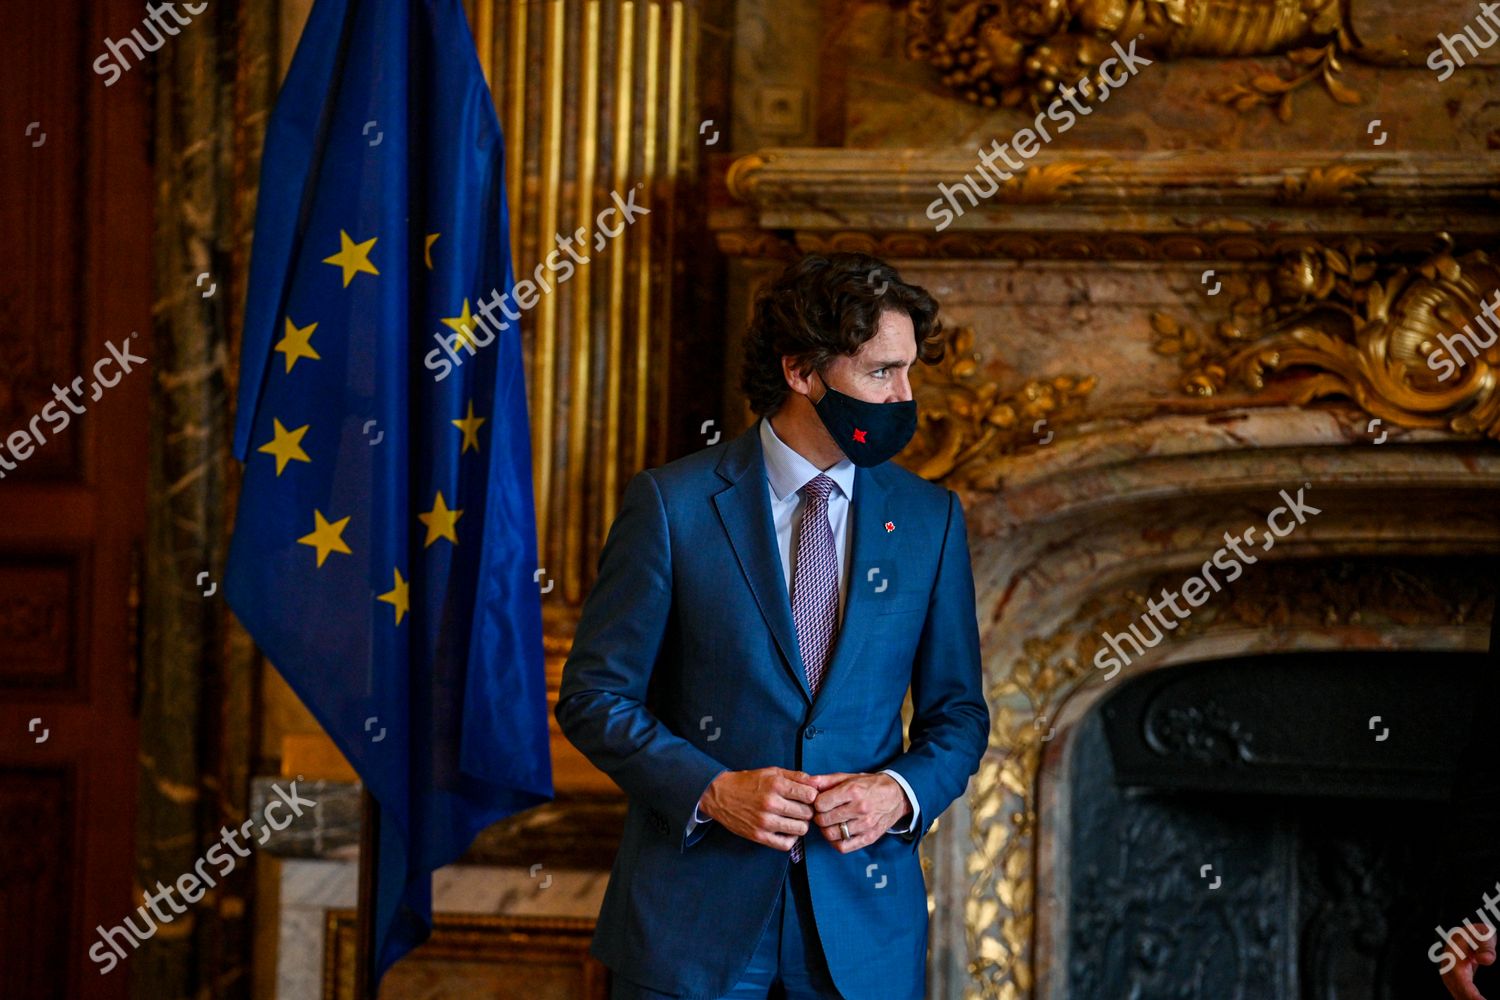 king-philippe-receives-canadian-prime-minister-justin-trudeau-brussels-belgium-shutterstock-editorial-12084205a.jpg